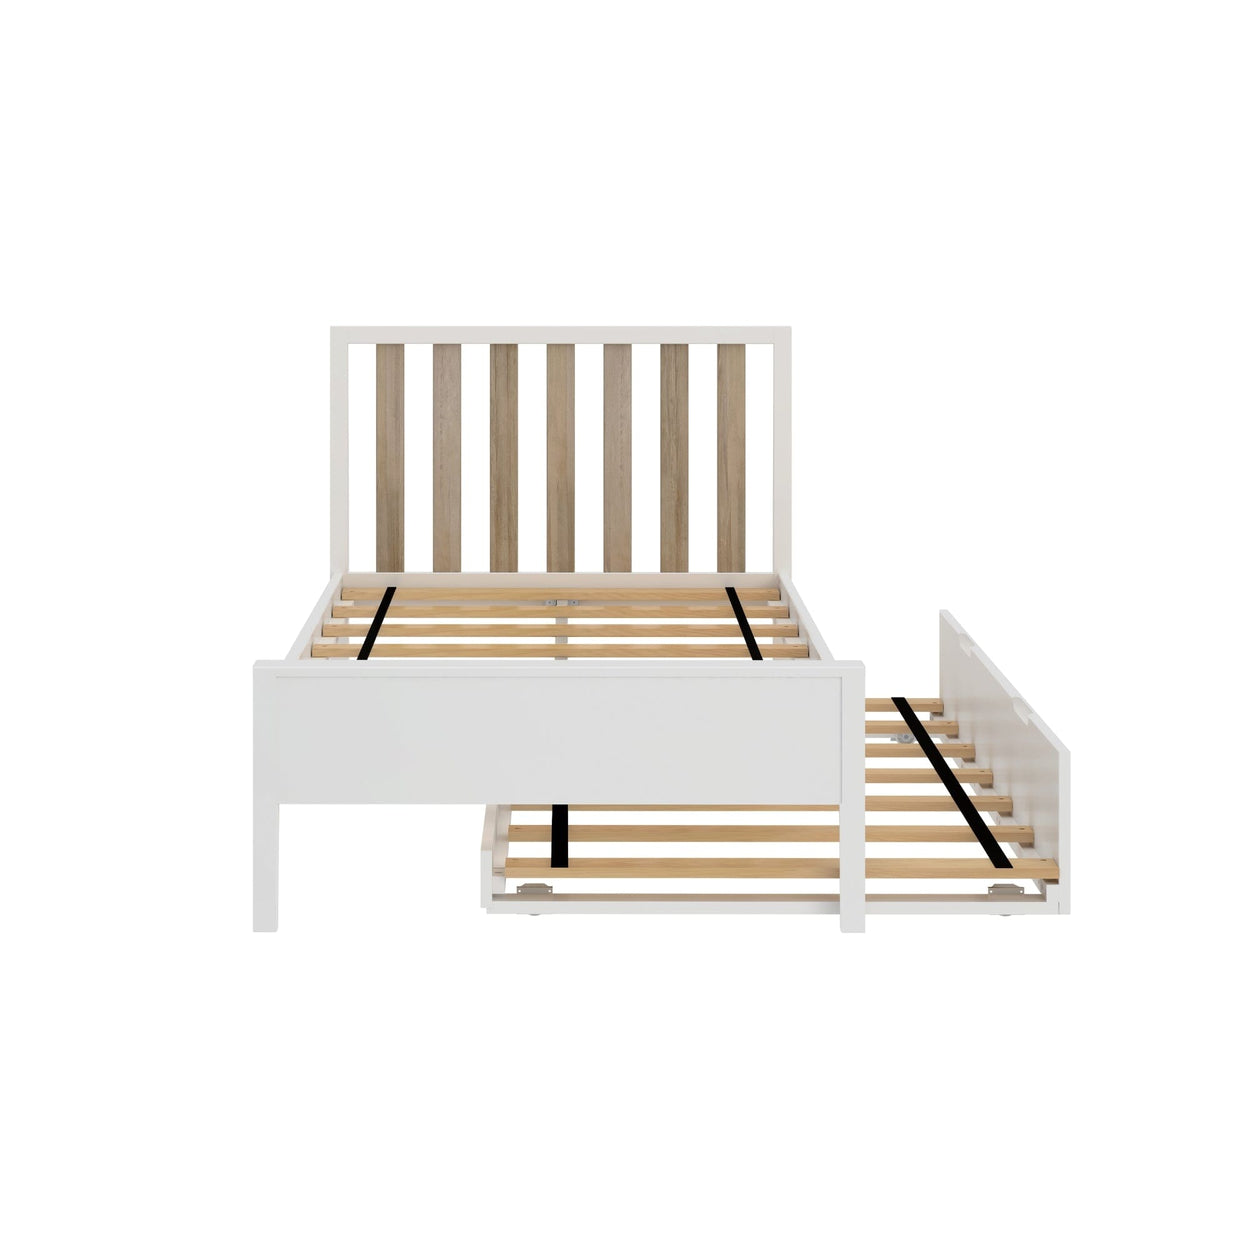 216210-202 : Kids Beds Scandinavian Twin-Size Bed with Twin-Size Trundle, White/Blonde